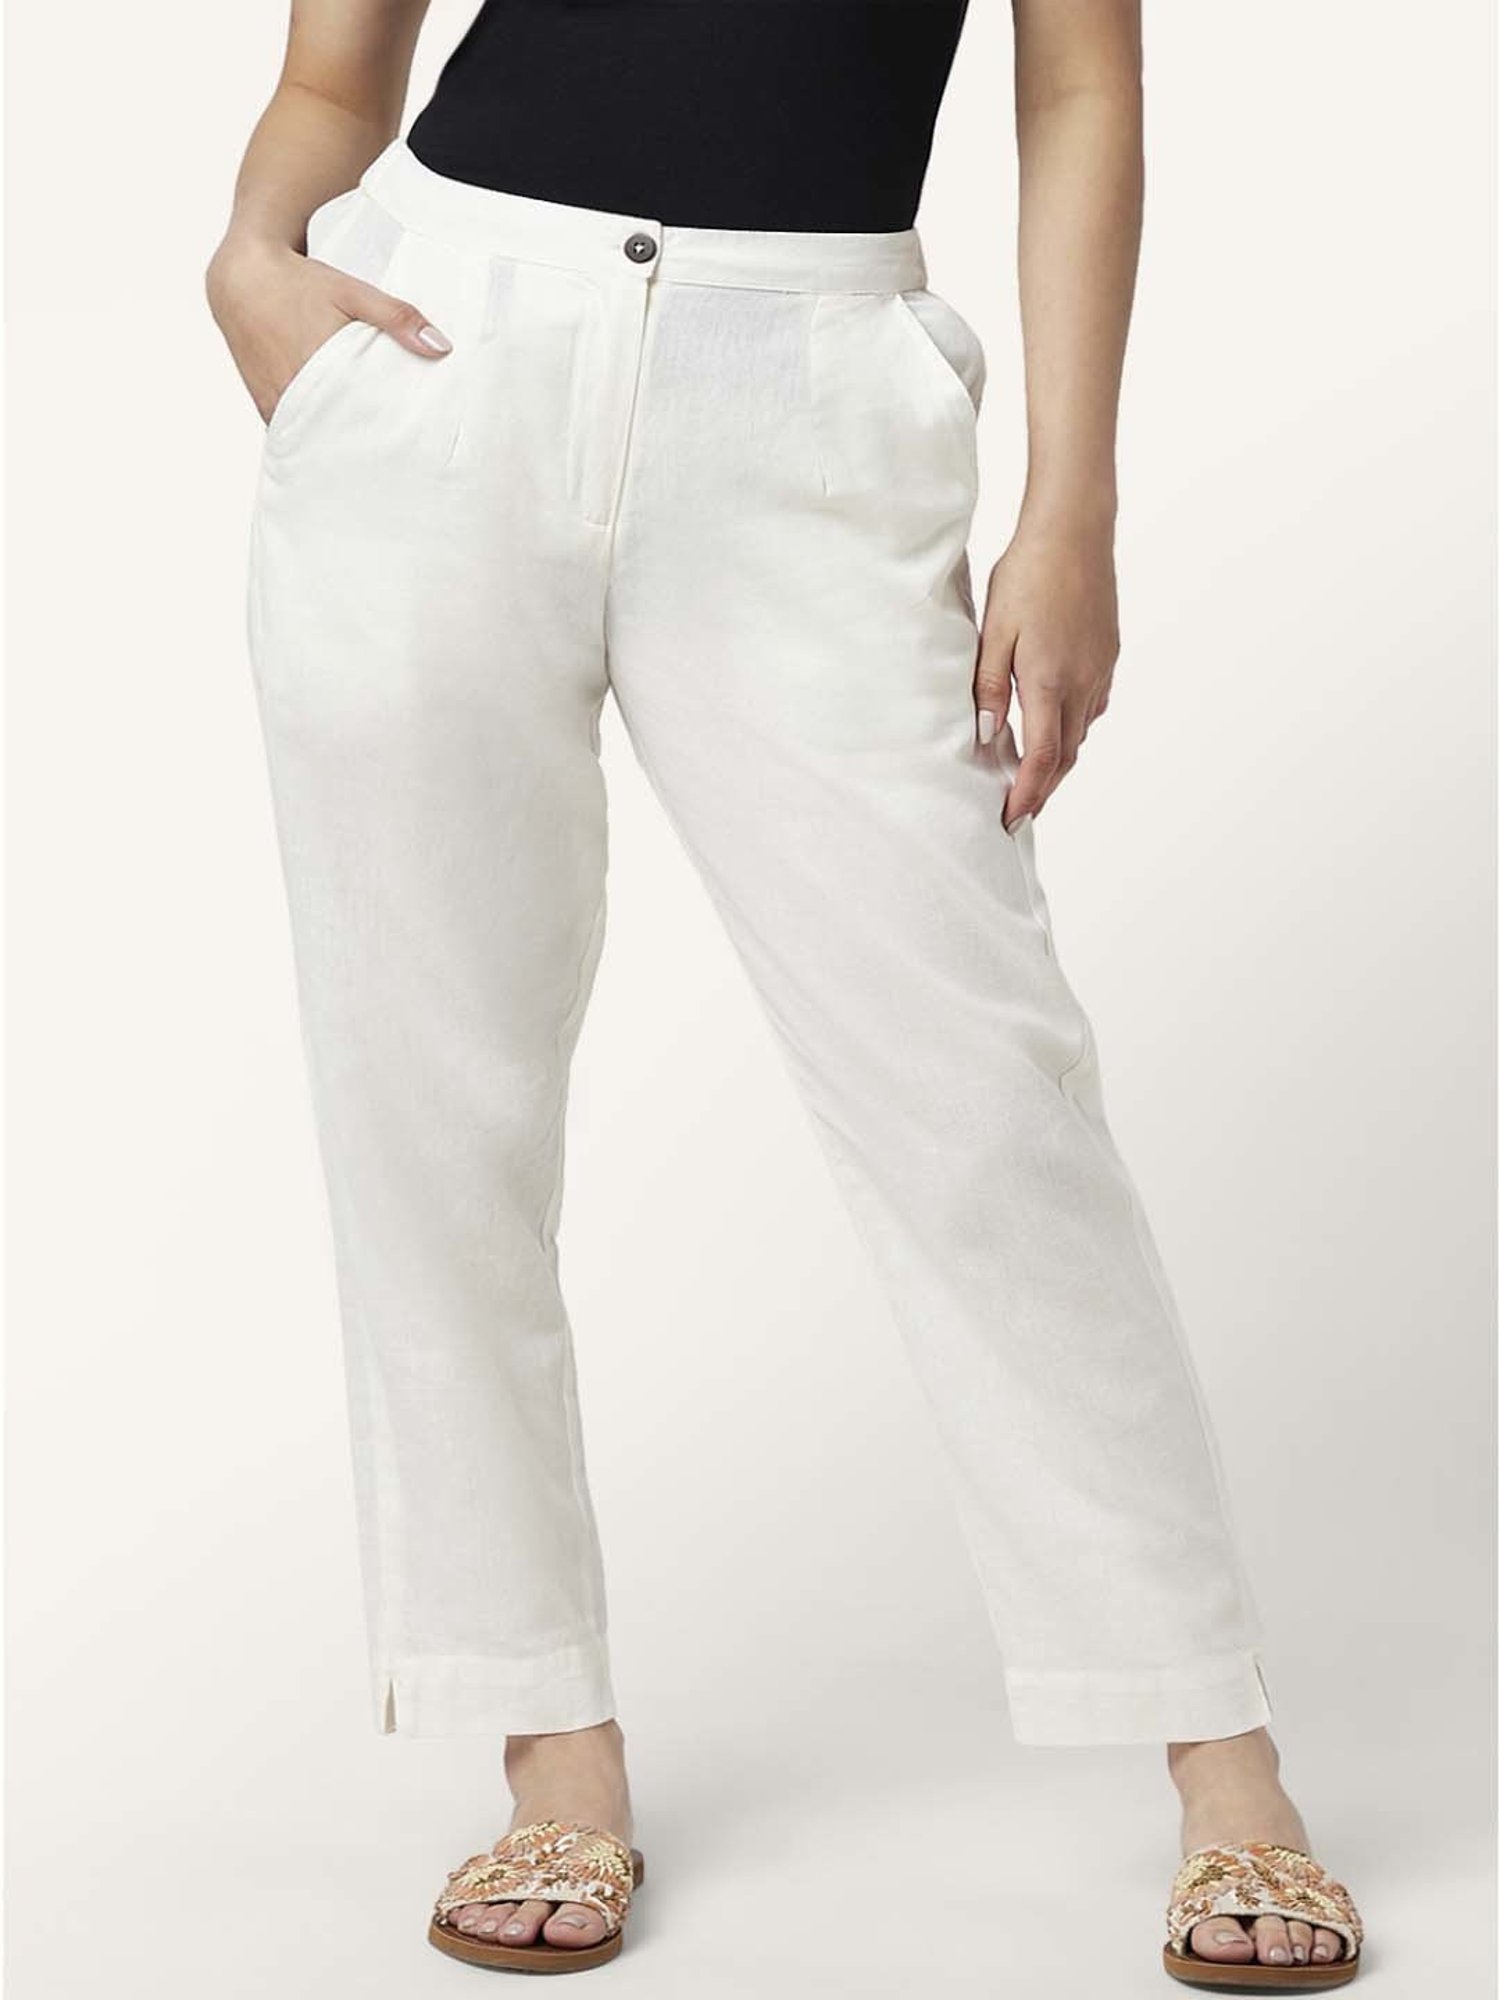 Juniper Bottoms  Buy Juniper Off White Grey Cotton Solid Cigarette Pants  Online  Nykaa Fashion